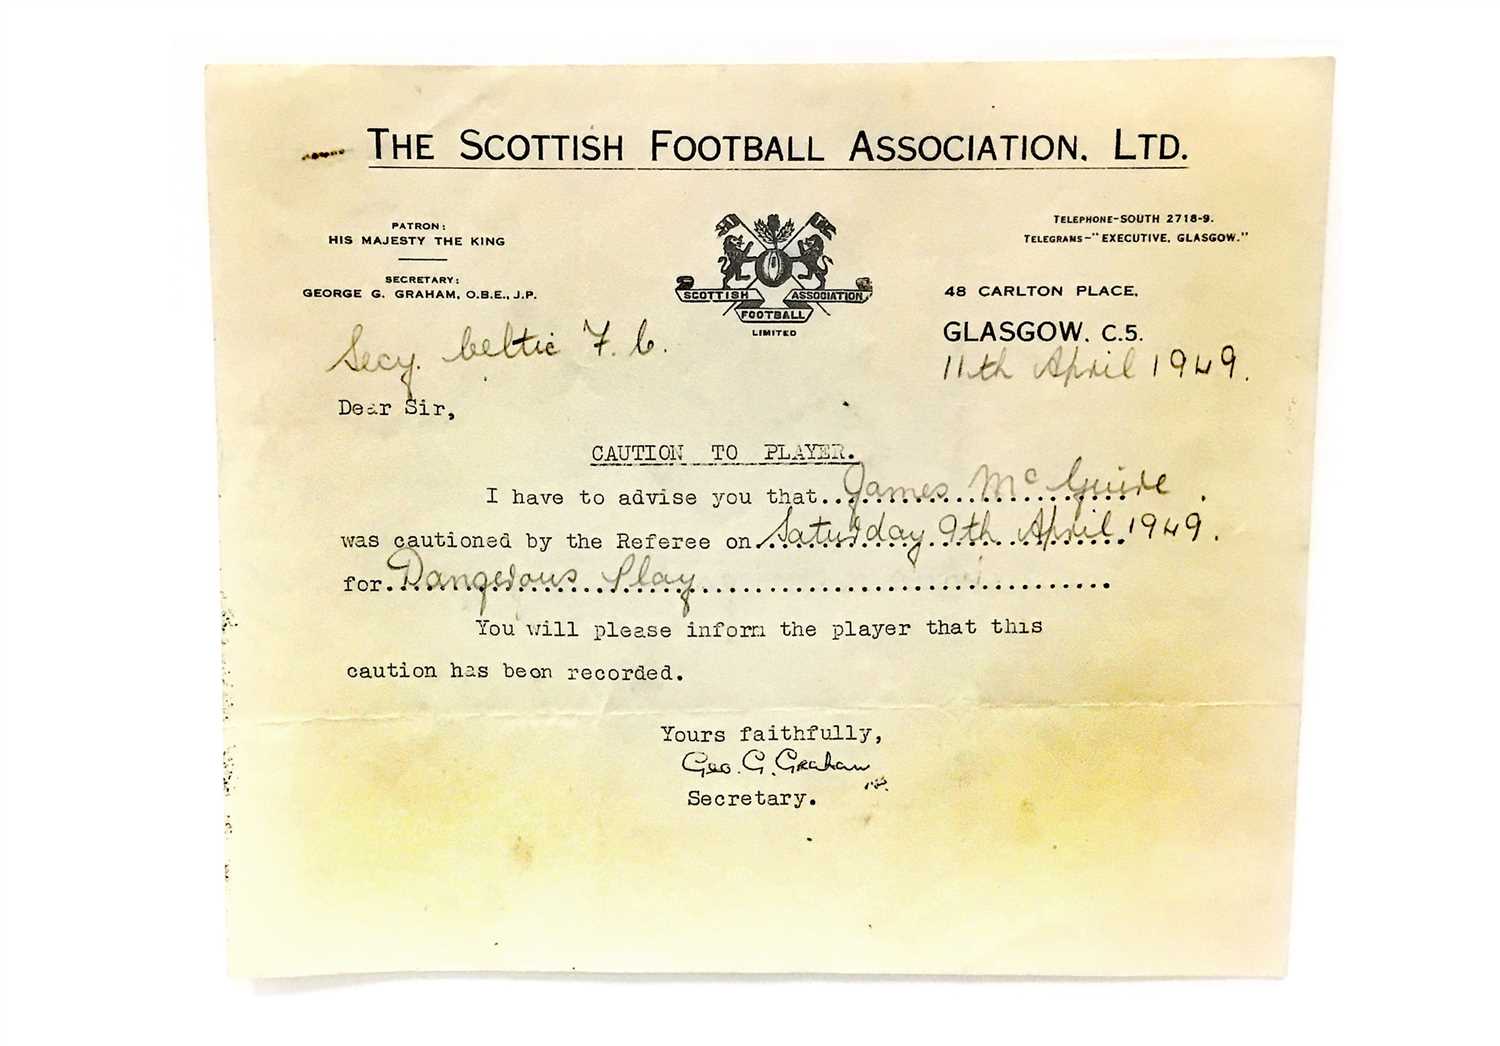 Lot 50 - A LOT OF THREE SCOTTISH FOOTBALL ASSOCIATION LTD. CAUTIONS ISSUED TO JAMES MCQUIRE